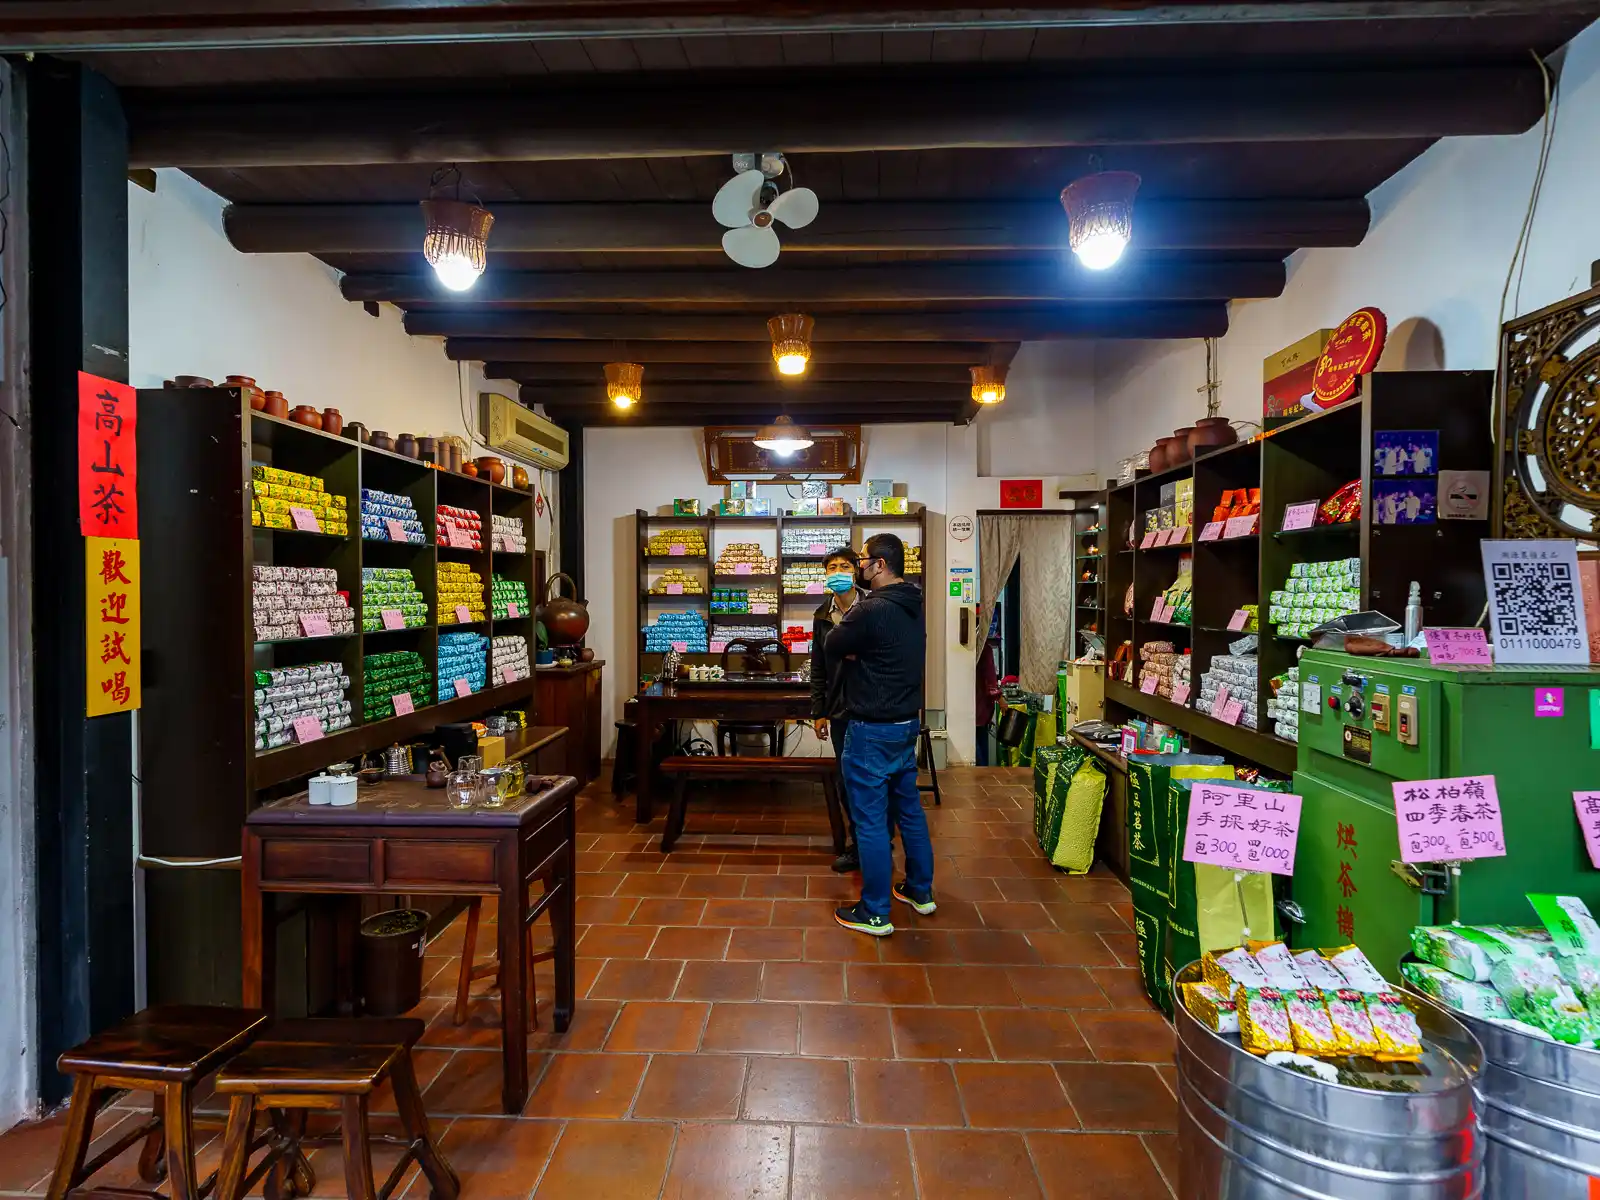 High mountain tea is lines the walls of a first floor shop with a simple interior.